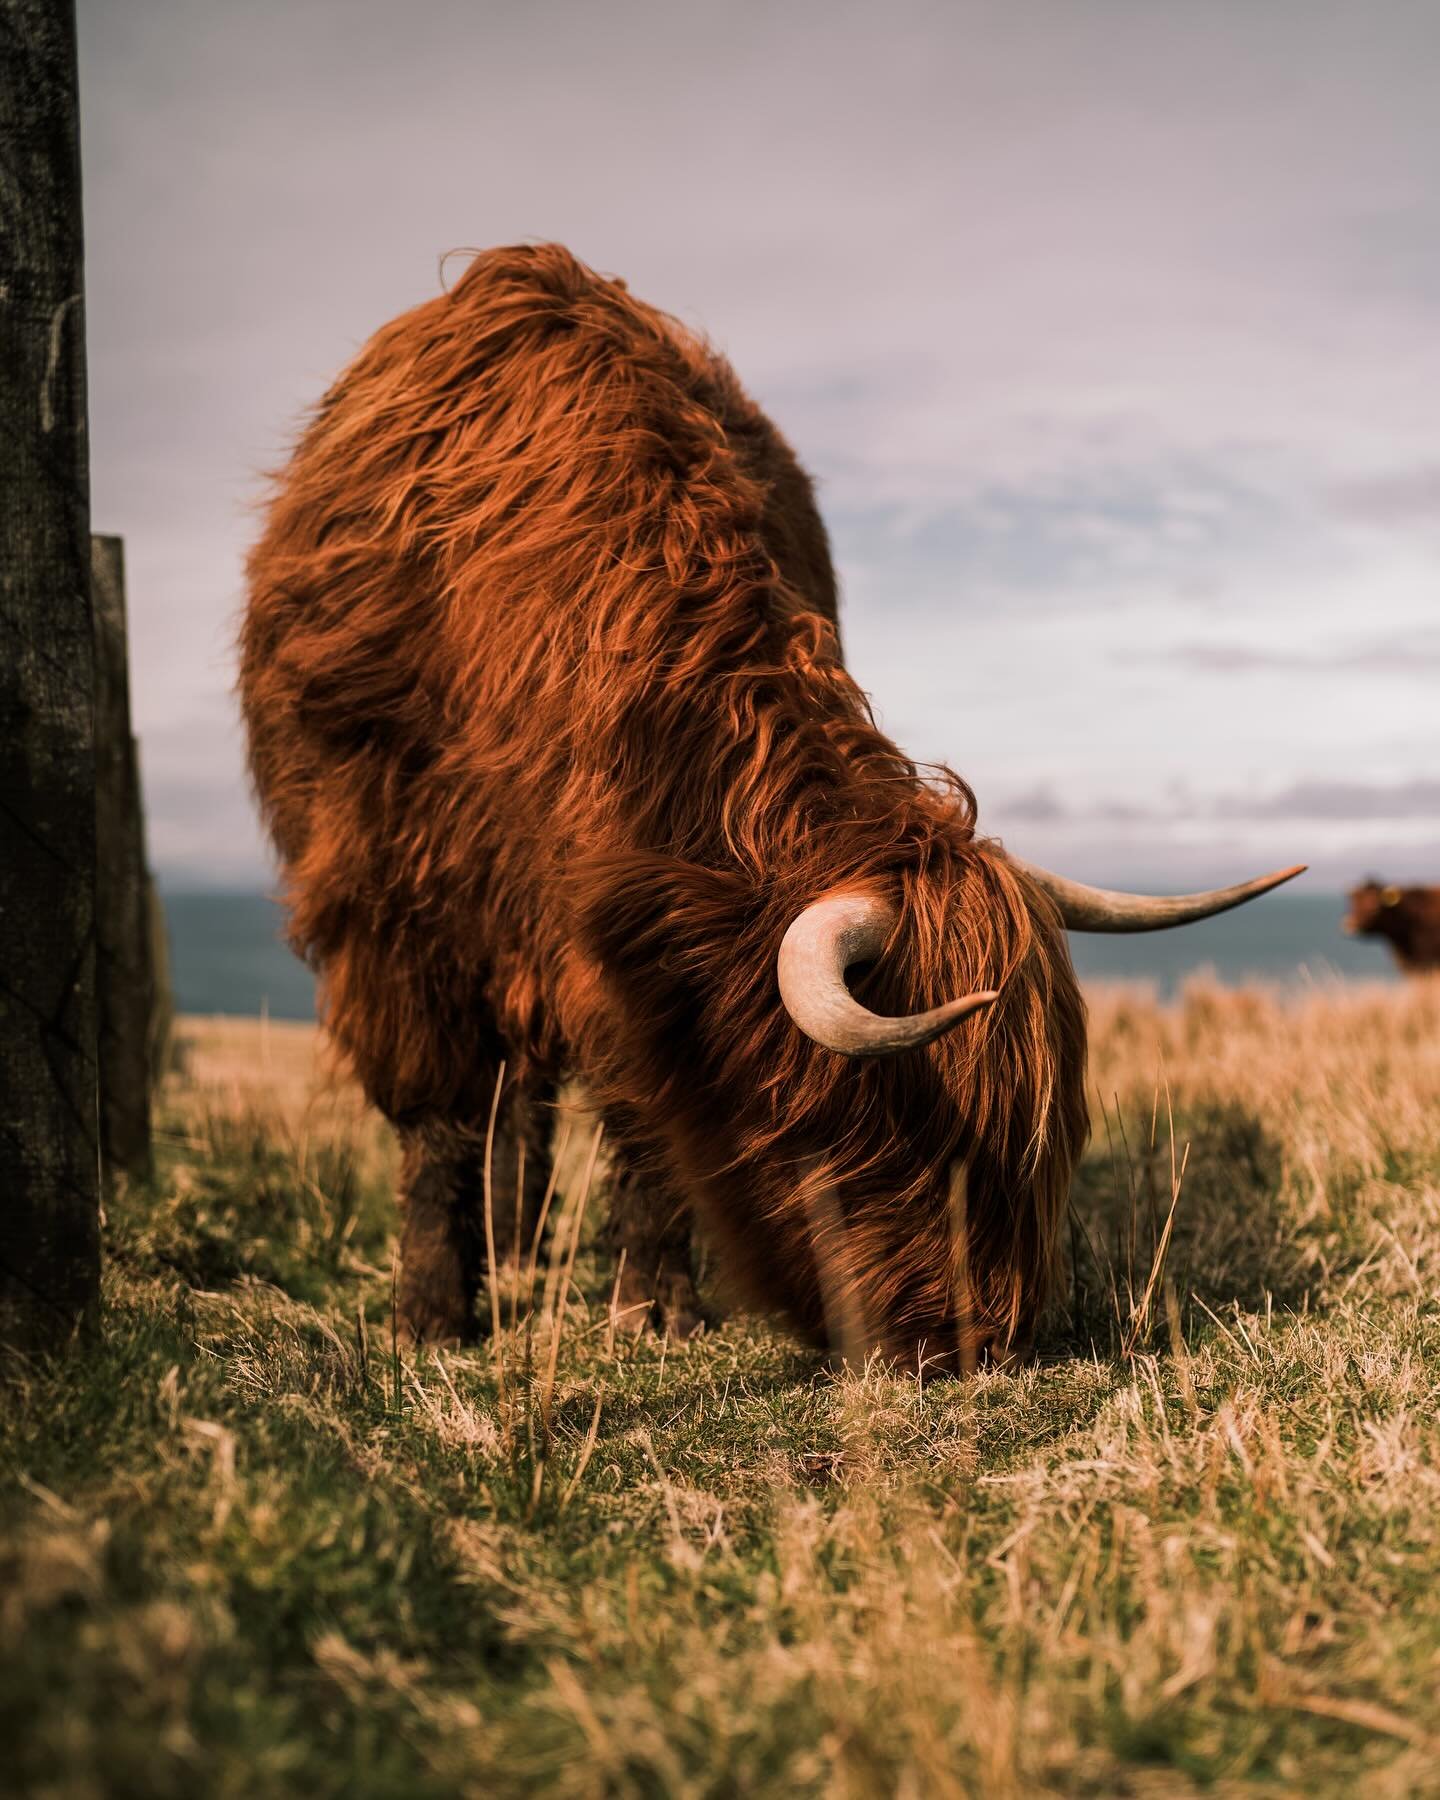 We saw many creatures on the Isle of Skye. Hares, stags, hawks, herons, goats, so many sheep... Though none quite as adorable as the Highland Coos. Yes, here they call them 'Coos' not Cows.
.
.
.
#leica #leicam10 #isleofskye #highlandcoo #highlandcoo